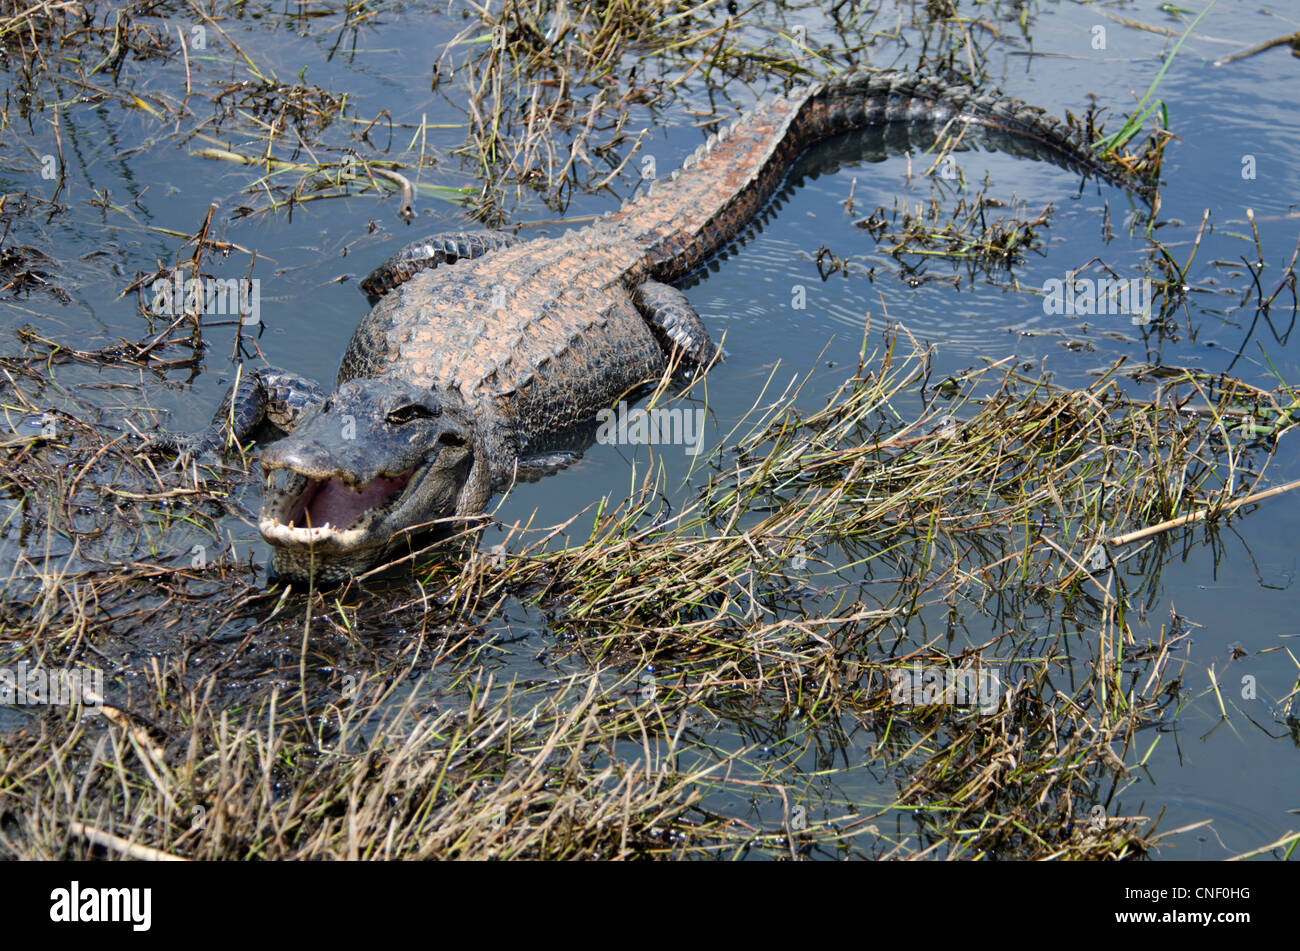 An open-jawed, threatening American Alligator, Alligator mississippiensis, in the Sabine National Wildlife Refuge in Louisiana, USA. Stock Photo